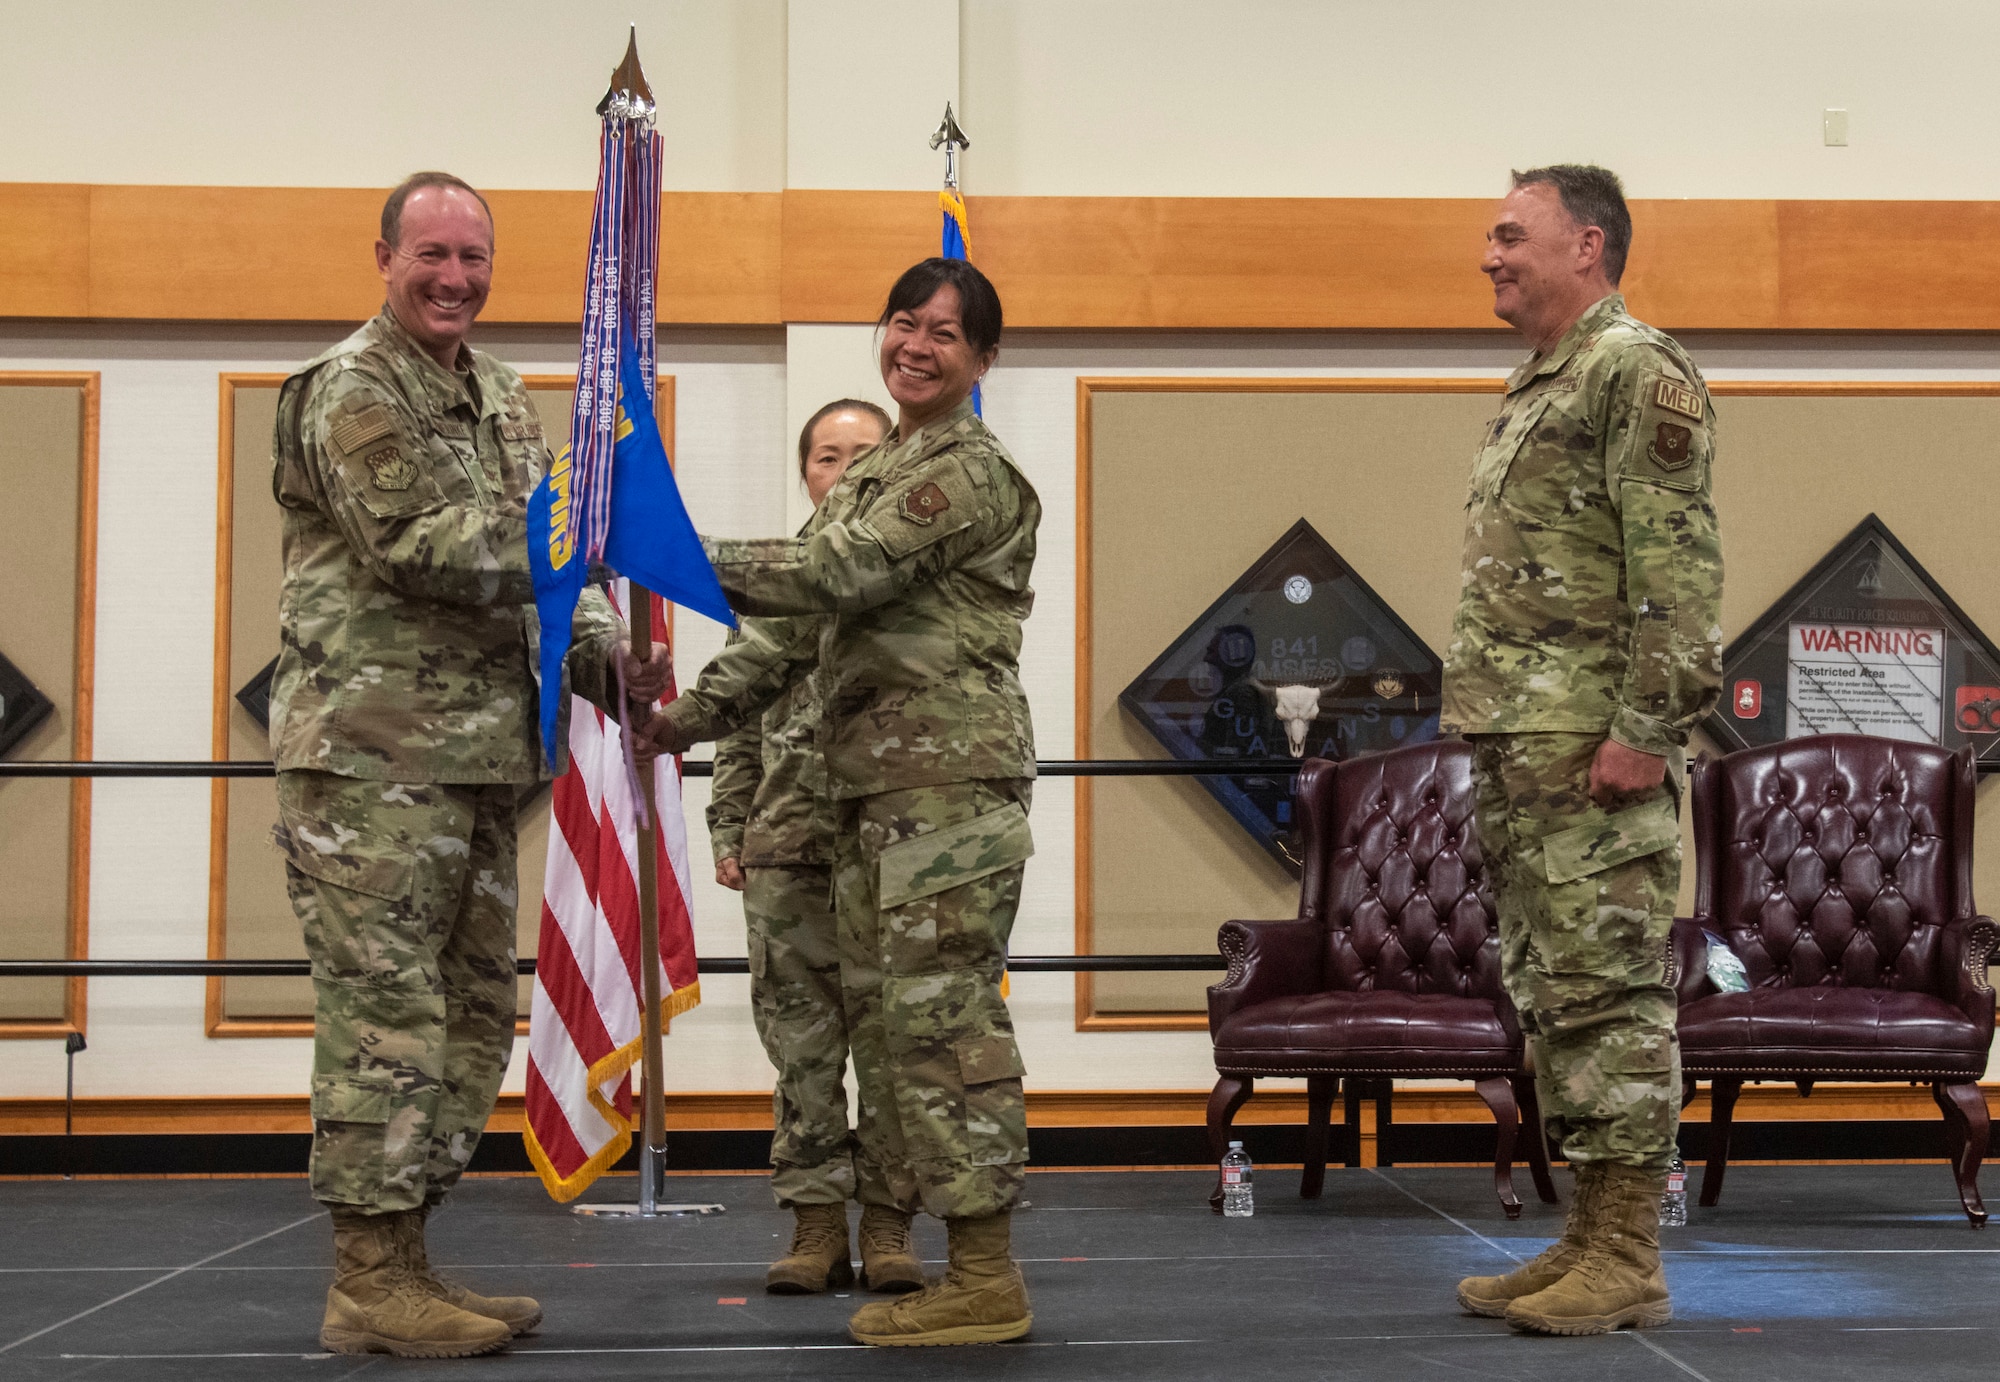 Lt. Col. Michelle Dimoff, 341st Operational Medical Readiness Squadron outgoing commander, right, relinquishes command to Col. Mark Pomerinke, 341st Medical Group commander, during a change of command ceremony, June 16, 2021 at Malmstrom Air Force Base, Mont.